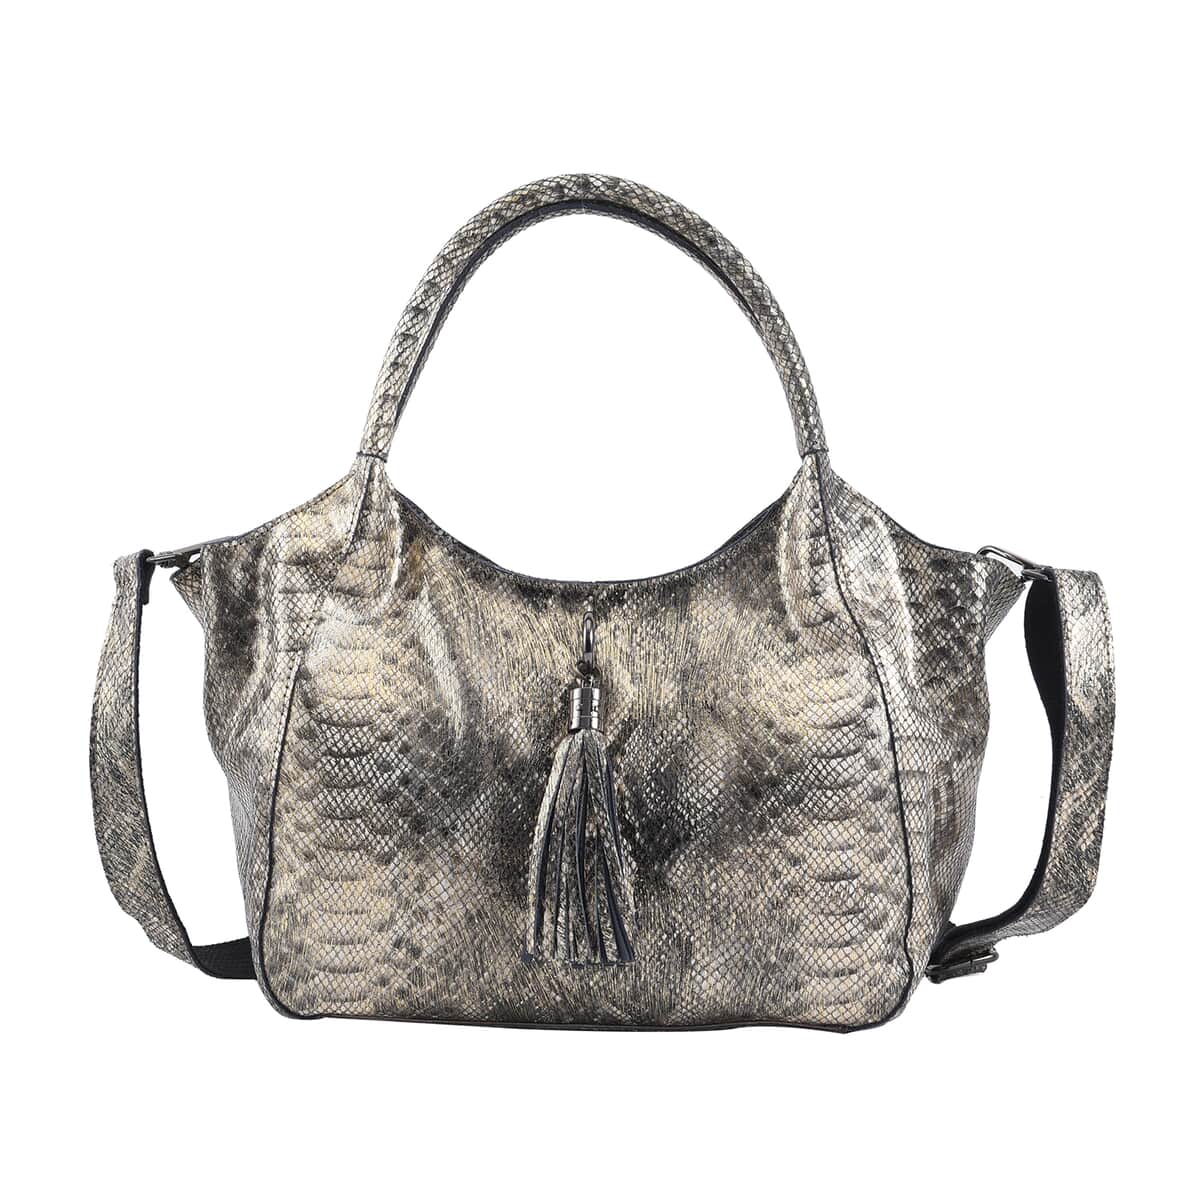 Gold and Black Snake Print Genuine Leather Hobo Bag (11"x6"x9") with 47" Detachable Shoulder Strap and 7" Handle Drop image number 0